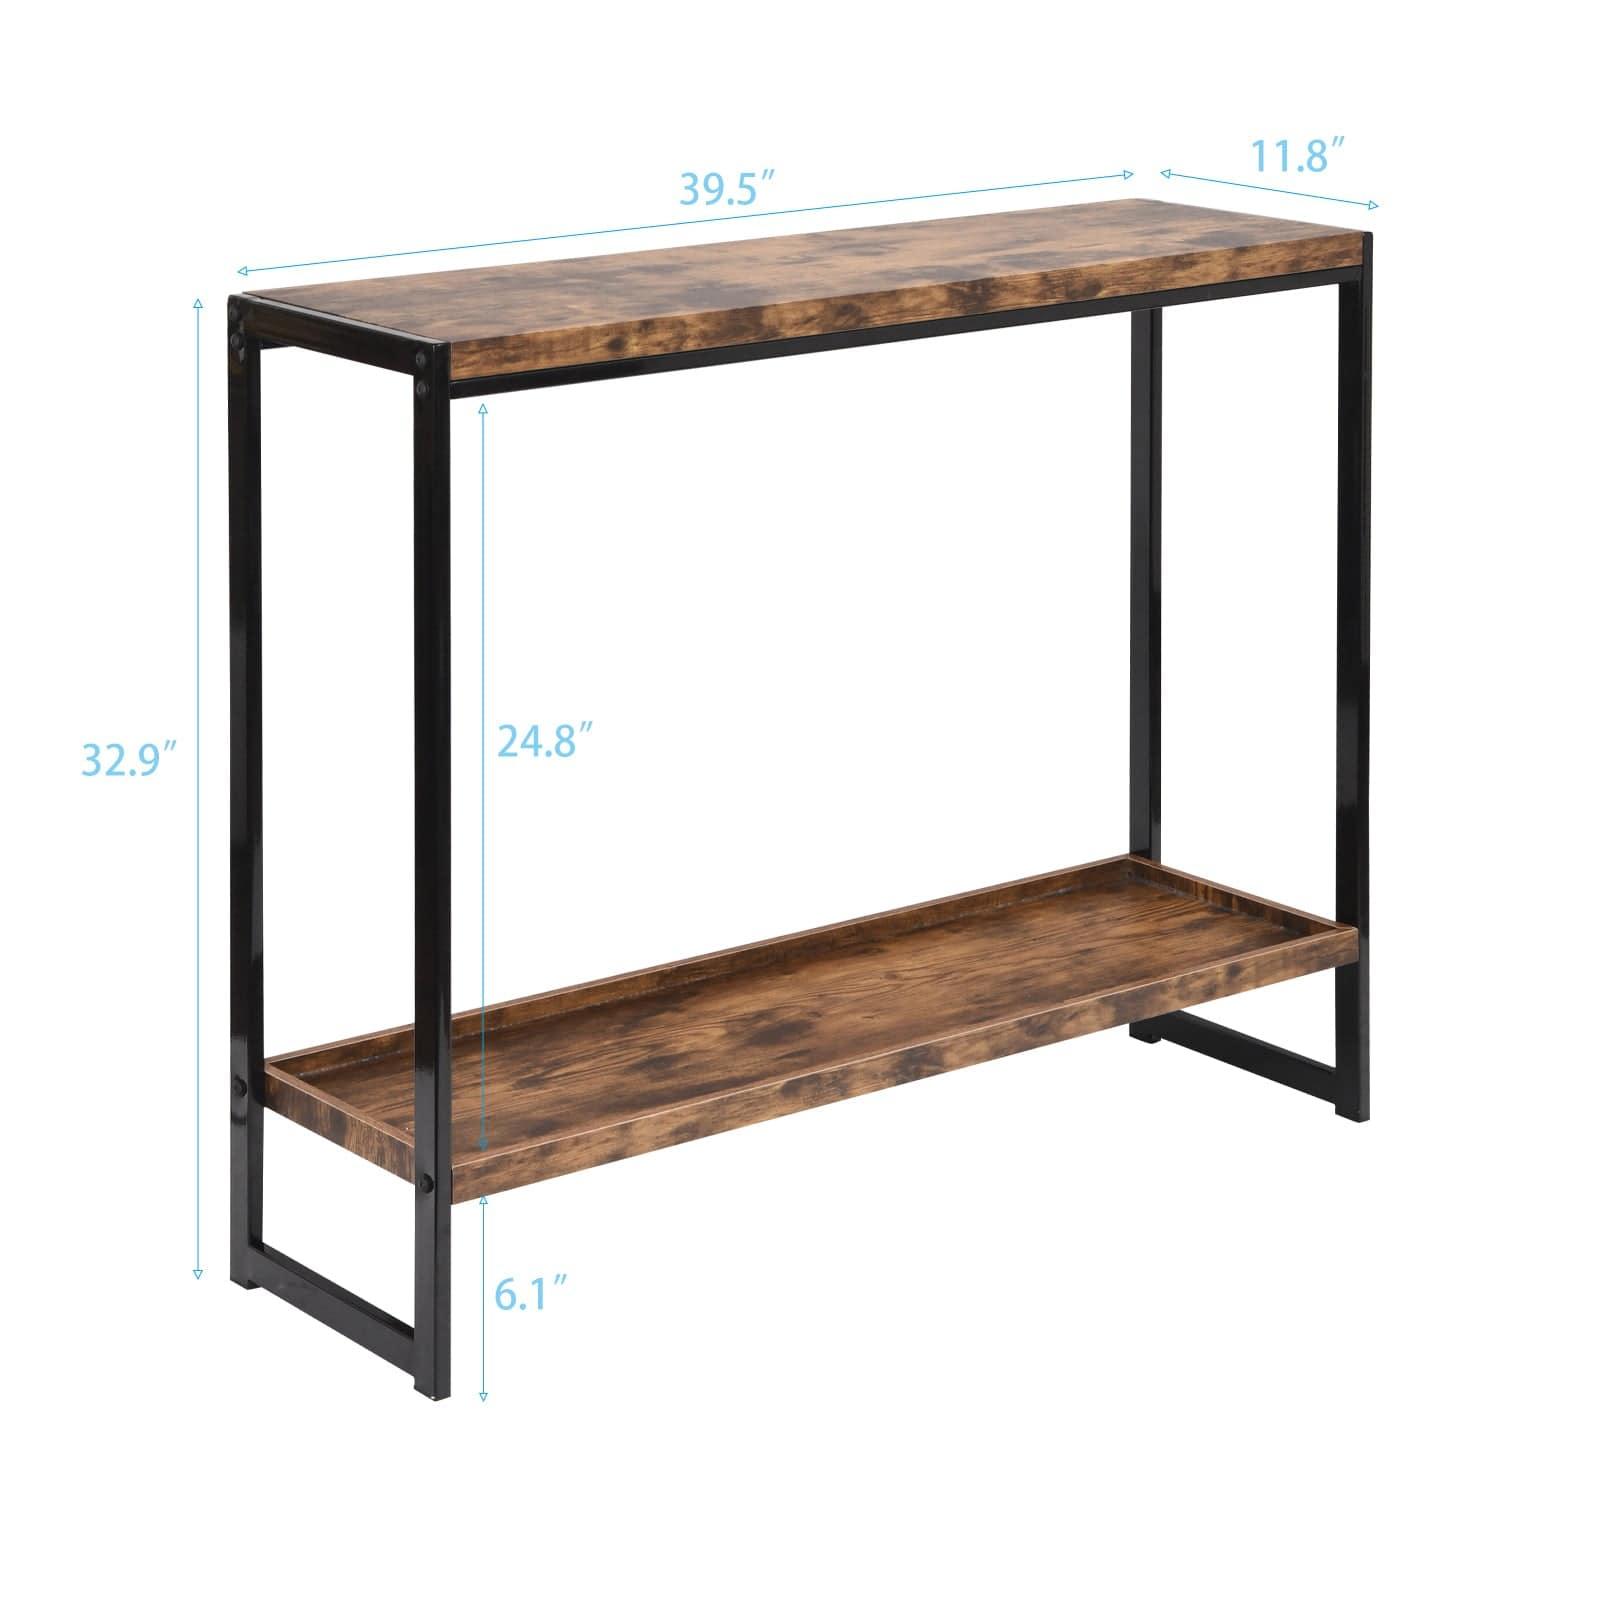 Shop Rustic 2-tier Console Table Side Table with Metal Frame Mademoiselle Home Decor